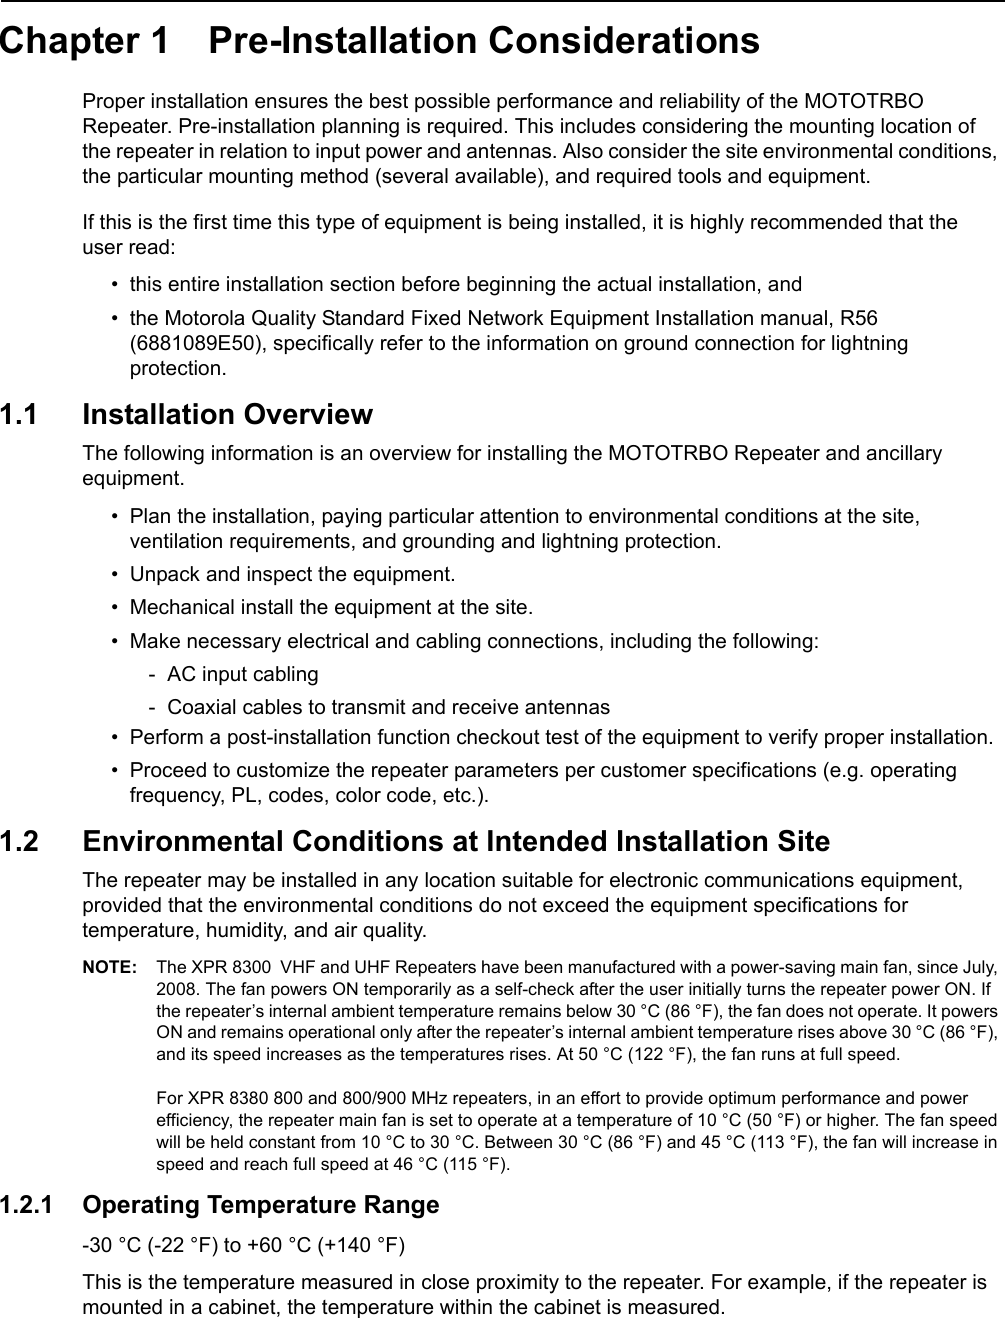 Chapter 1 Pre-Installation Considerations Proper installation ensures the best possible performance and reliability of the MOTOTRBO Repeater. Pre-installation planning is required. This includes considering the mounting location of the repeater in relation to input power and antennas. Also consider the site environmental conditions, the particular mounting method (several available), and required tools and equipment.If this is the first time this type of equipment is being installed, it is highly recommended that the  user read:• this entire installation section before beginning the actual installation, and• the Motorola Quality Standard Fixed Network Equipment Installation manual, R56 (6881089E50), specifically refer to the information on ground connection for lightning protection.1.1 Installation OverviewThe following information is an overview for installing the MOTOTRBO Repeater and ancillary equipment. • Plan the installation, paying particular attention to environmental conditions at the site, ventilation requirements, and grounding and lightning protection.• Unpack and inspect the equipment.• Mechanical install the equipment at the site.• Make necessary electrical and cabling connections, including the following:- AC input cabling- Coaxial cables to transmit and receive antennas• Perform a post-installation function checkout test of the equipment to verify proper installation.• Proceed to customize the repeater parameters per customer specifications (e.g. operating frequency, PL, codes, color code, etc.).1.2 Environmental Conditions at Intended Installation SiteThe repeater may be installed in any location suitable for electronic communications equipment, provided that the environmental conditions do not exceed the equipment specifications for temperature, humidity, and air quality. NOTE: The XPR 8300  VHF and UHF Repeaters have been manufactured with a power-saving main fan, since July, 2008. The fan powers ON temporarily as a self-check after the user initially turns the repeater power ON. If the repeater’s internal ambient temperature remains below 30 °C (86 °F), the fan does not operate. It powers ON and remains operational only after the repeater’s internal ambient temperature rises above 30 °C (86 °F), and its speed increases as the temperatures rises. At 50 °C (122 °F), the fan runs at full speed.  For XPR 8380 800 and 800/900 MHz repeaters, in an effort to provide optimum performance and power efficiency, the repeater main fan is set to operate at a temperature of 10 °C (50 °F) or higher. The fan speed will be held constant from 10 °C to 30 °C. Between 30 °C (86 °F) and 45 °C (113 °F), the fan will increase in speed and reach full speed at 46 °C (115 °F).1.2.1 Operating Temperature Range-30 °C (-22 °F) to +60 °C (+140 °F)This is the temperature measured in close proximity to the repeater. For example, if the repeater is mounted in a cabinet, the temperature within the cabinet is measured.